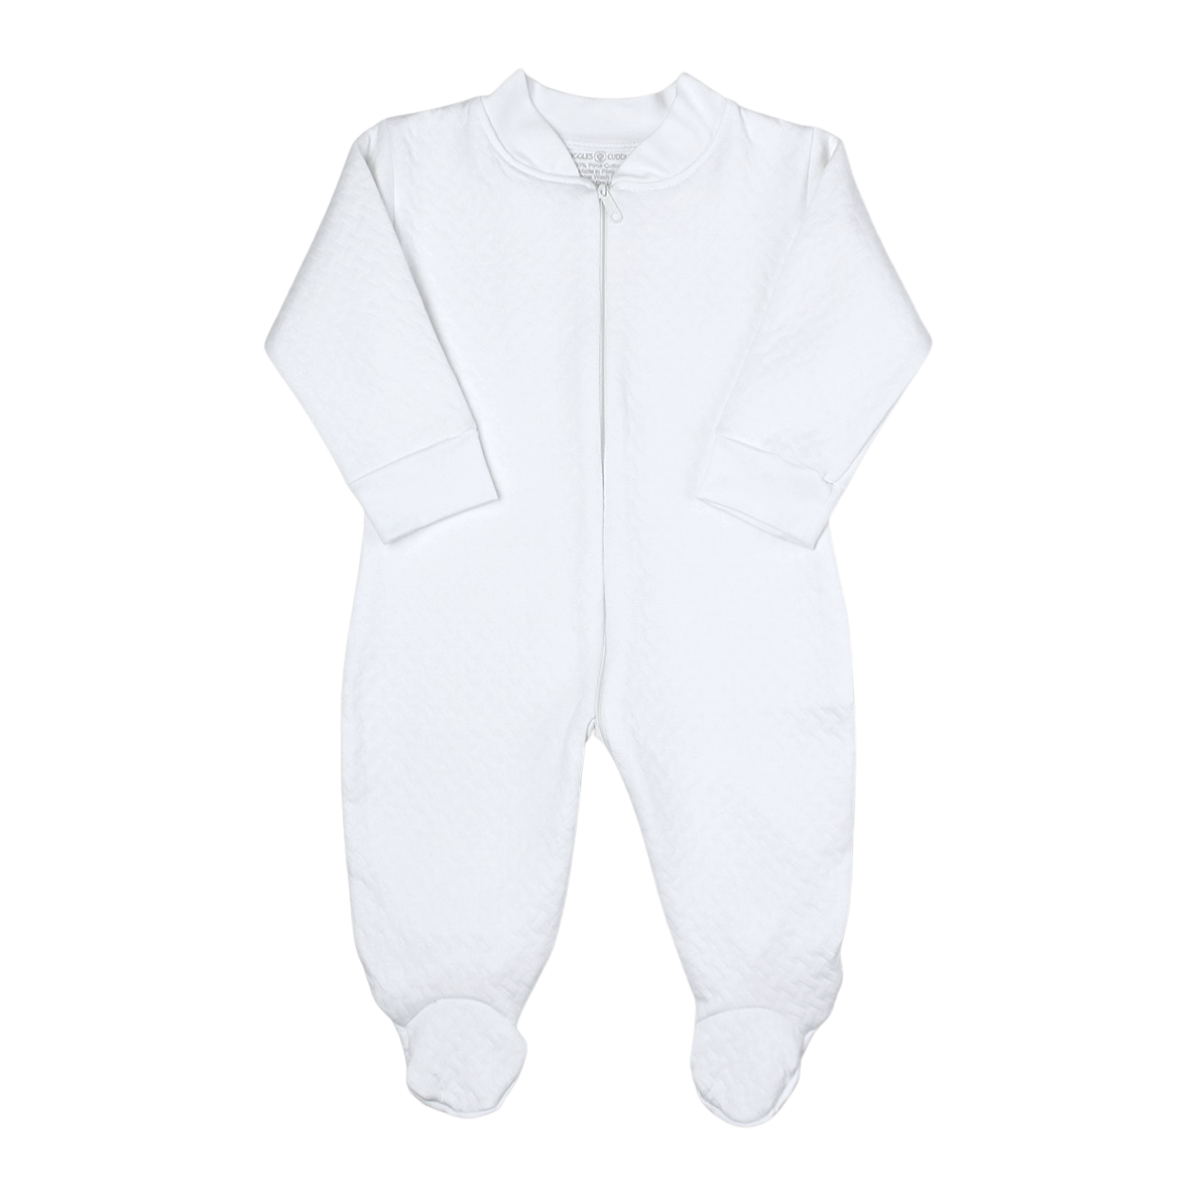 White - Sleep and Play Zipper Footie in Jacquard Cotton